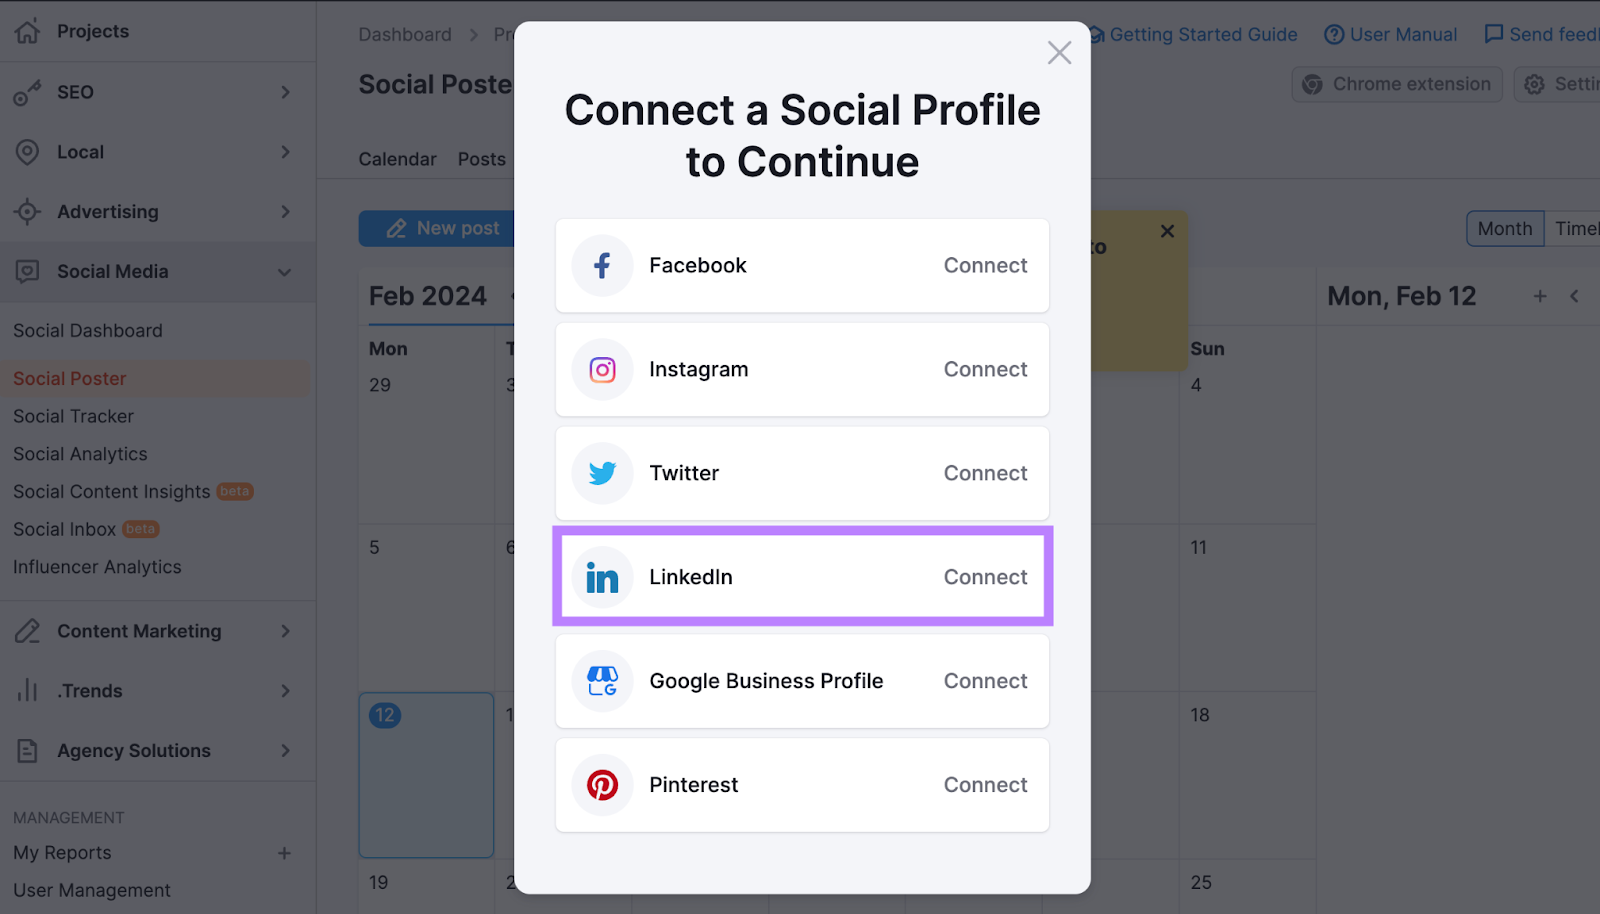 "LinkedIn" selected under "Connect a Social Profile to Continue" pop-up window